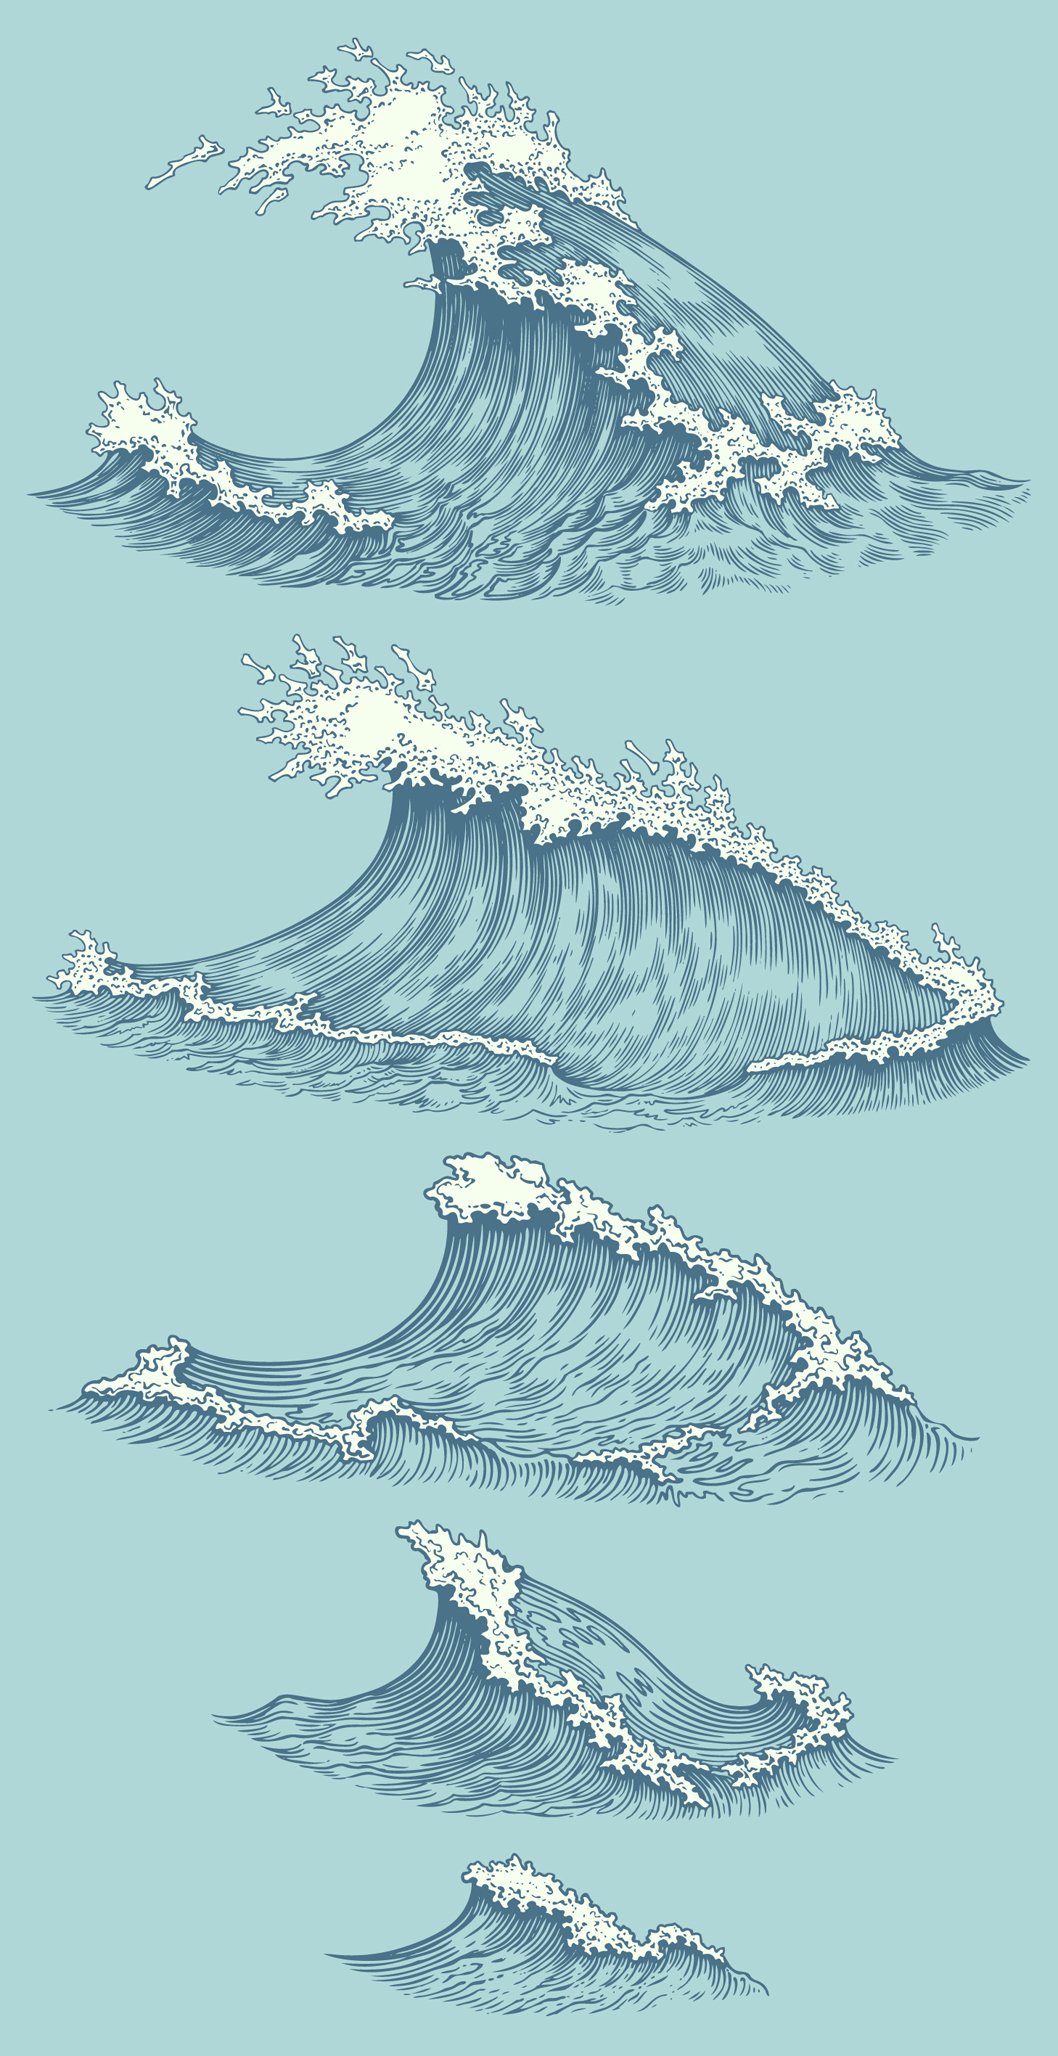 A set of 5 waves illustrations in different sizes on a blue background.